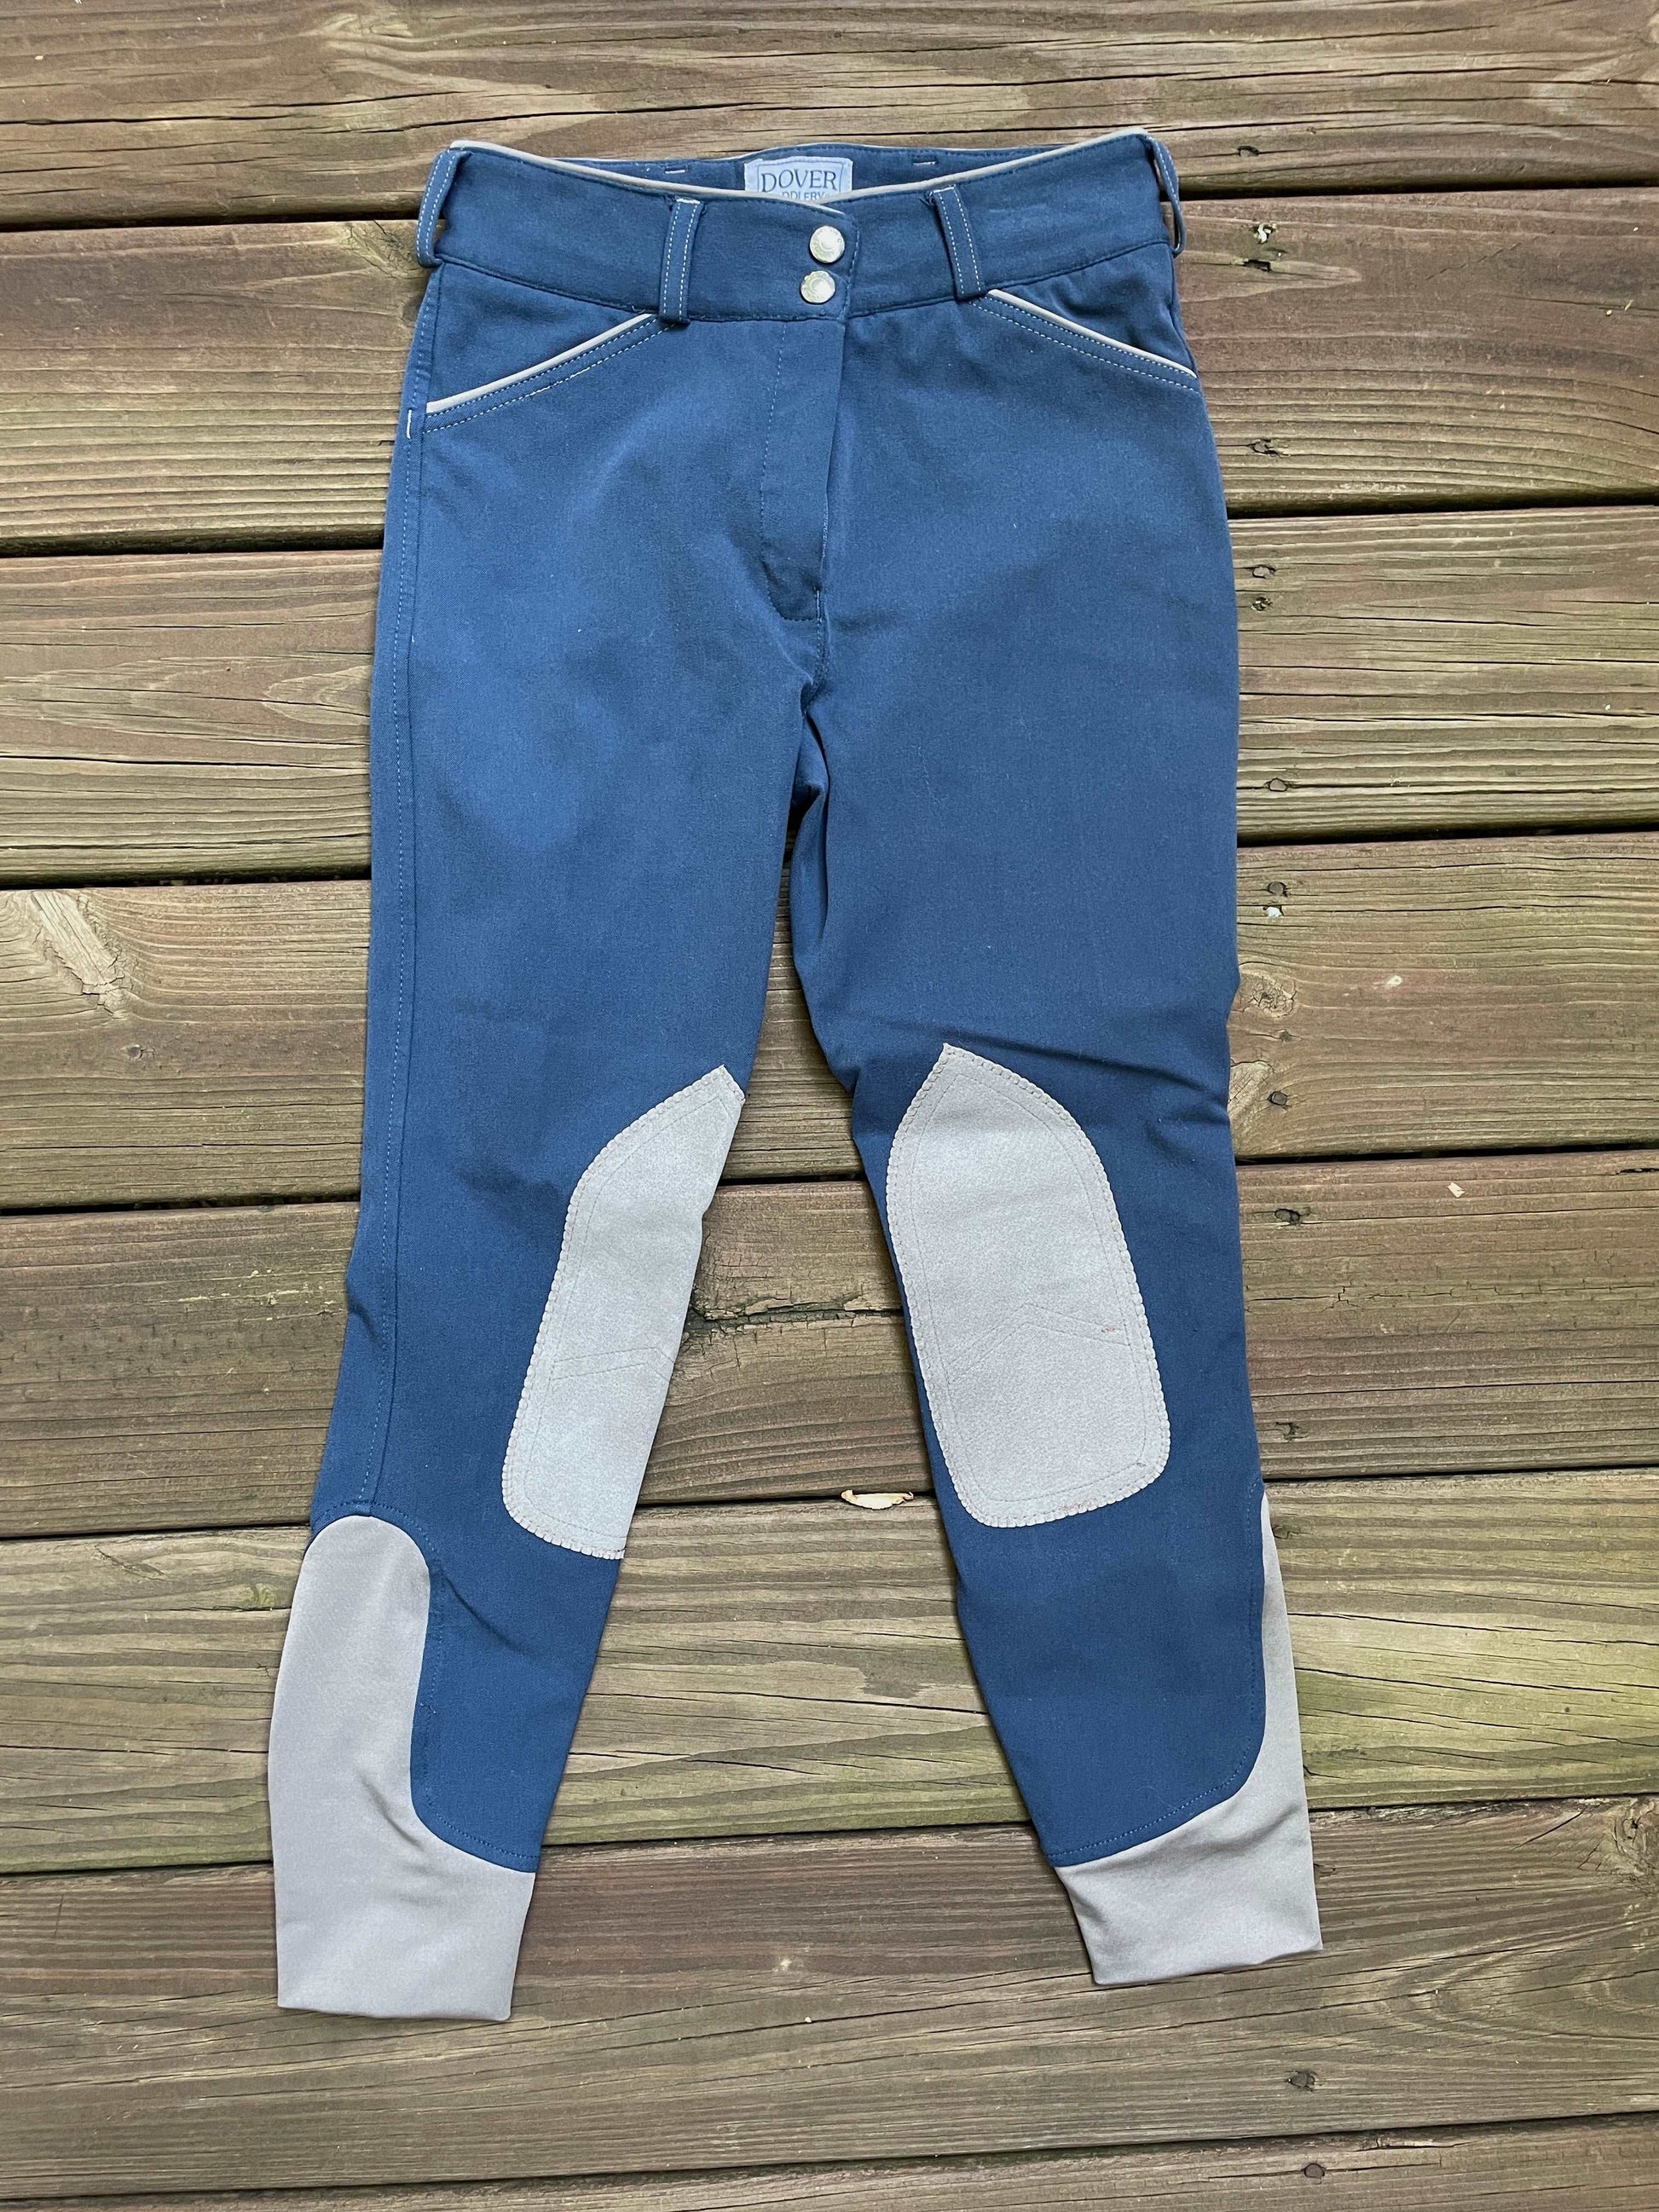 ThriftedEquestrian Clothing 12R Dover Saddlery Breeches - Youth 12